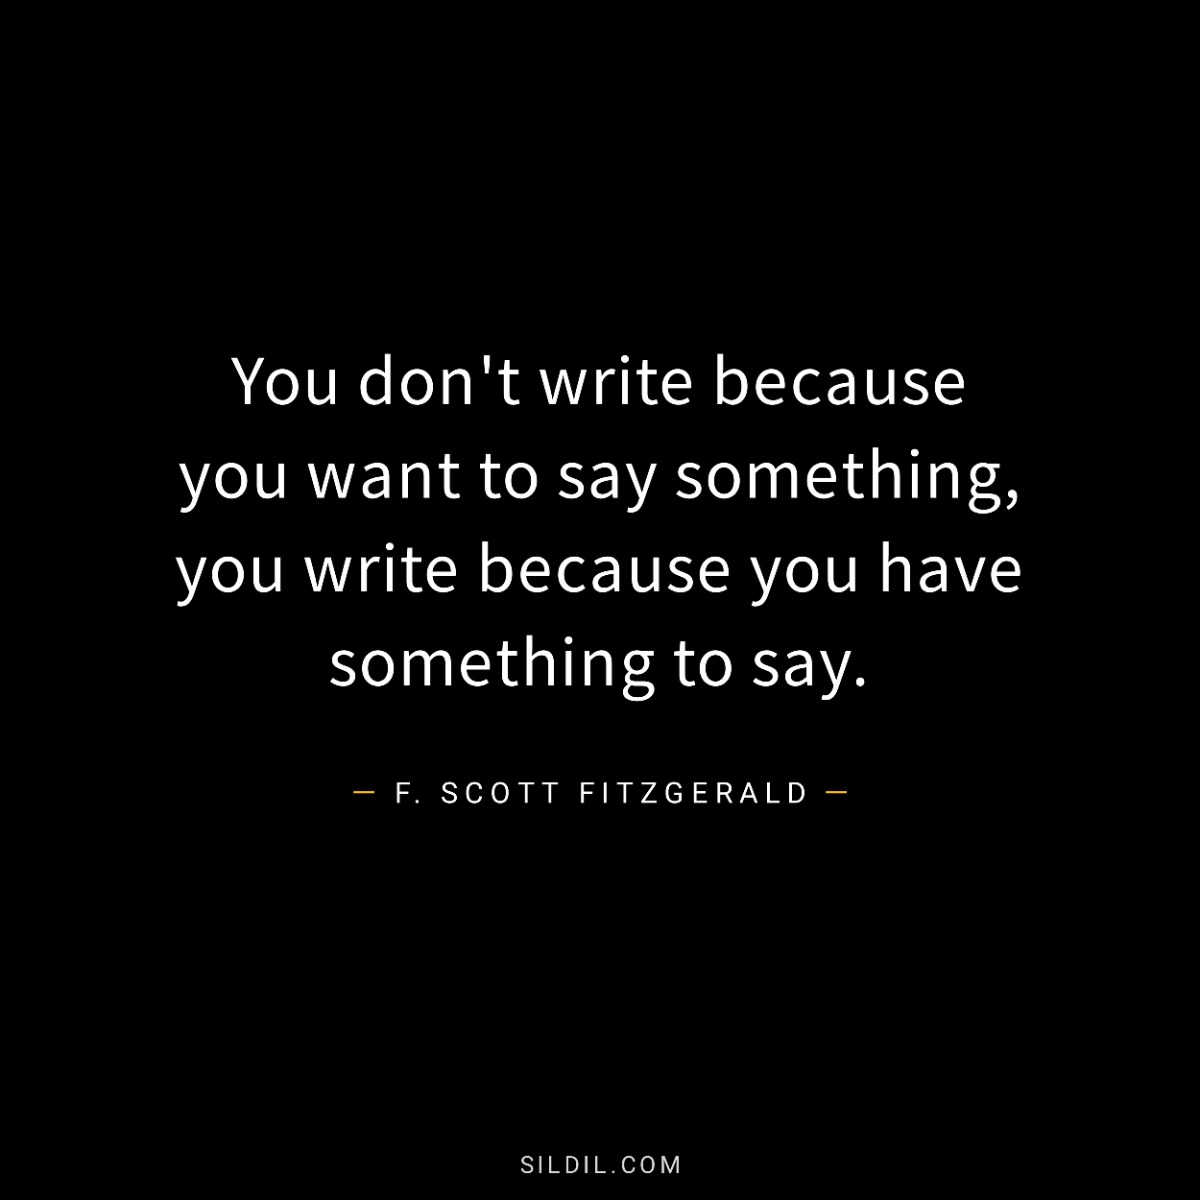 You don't write because you want to say something, you write because you have something to say.